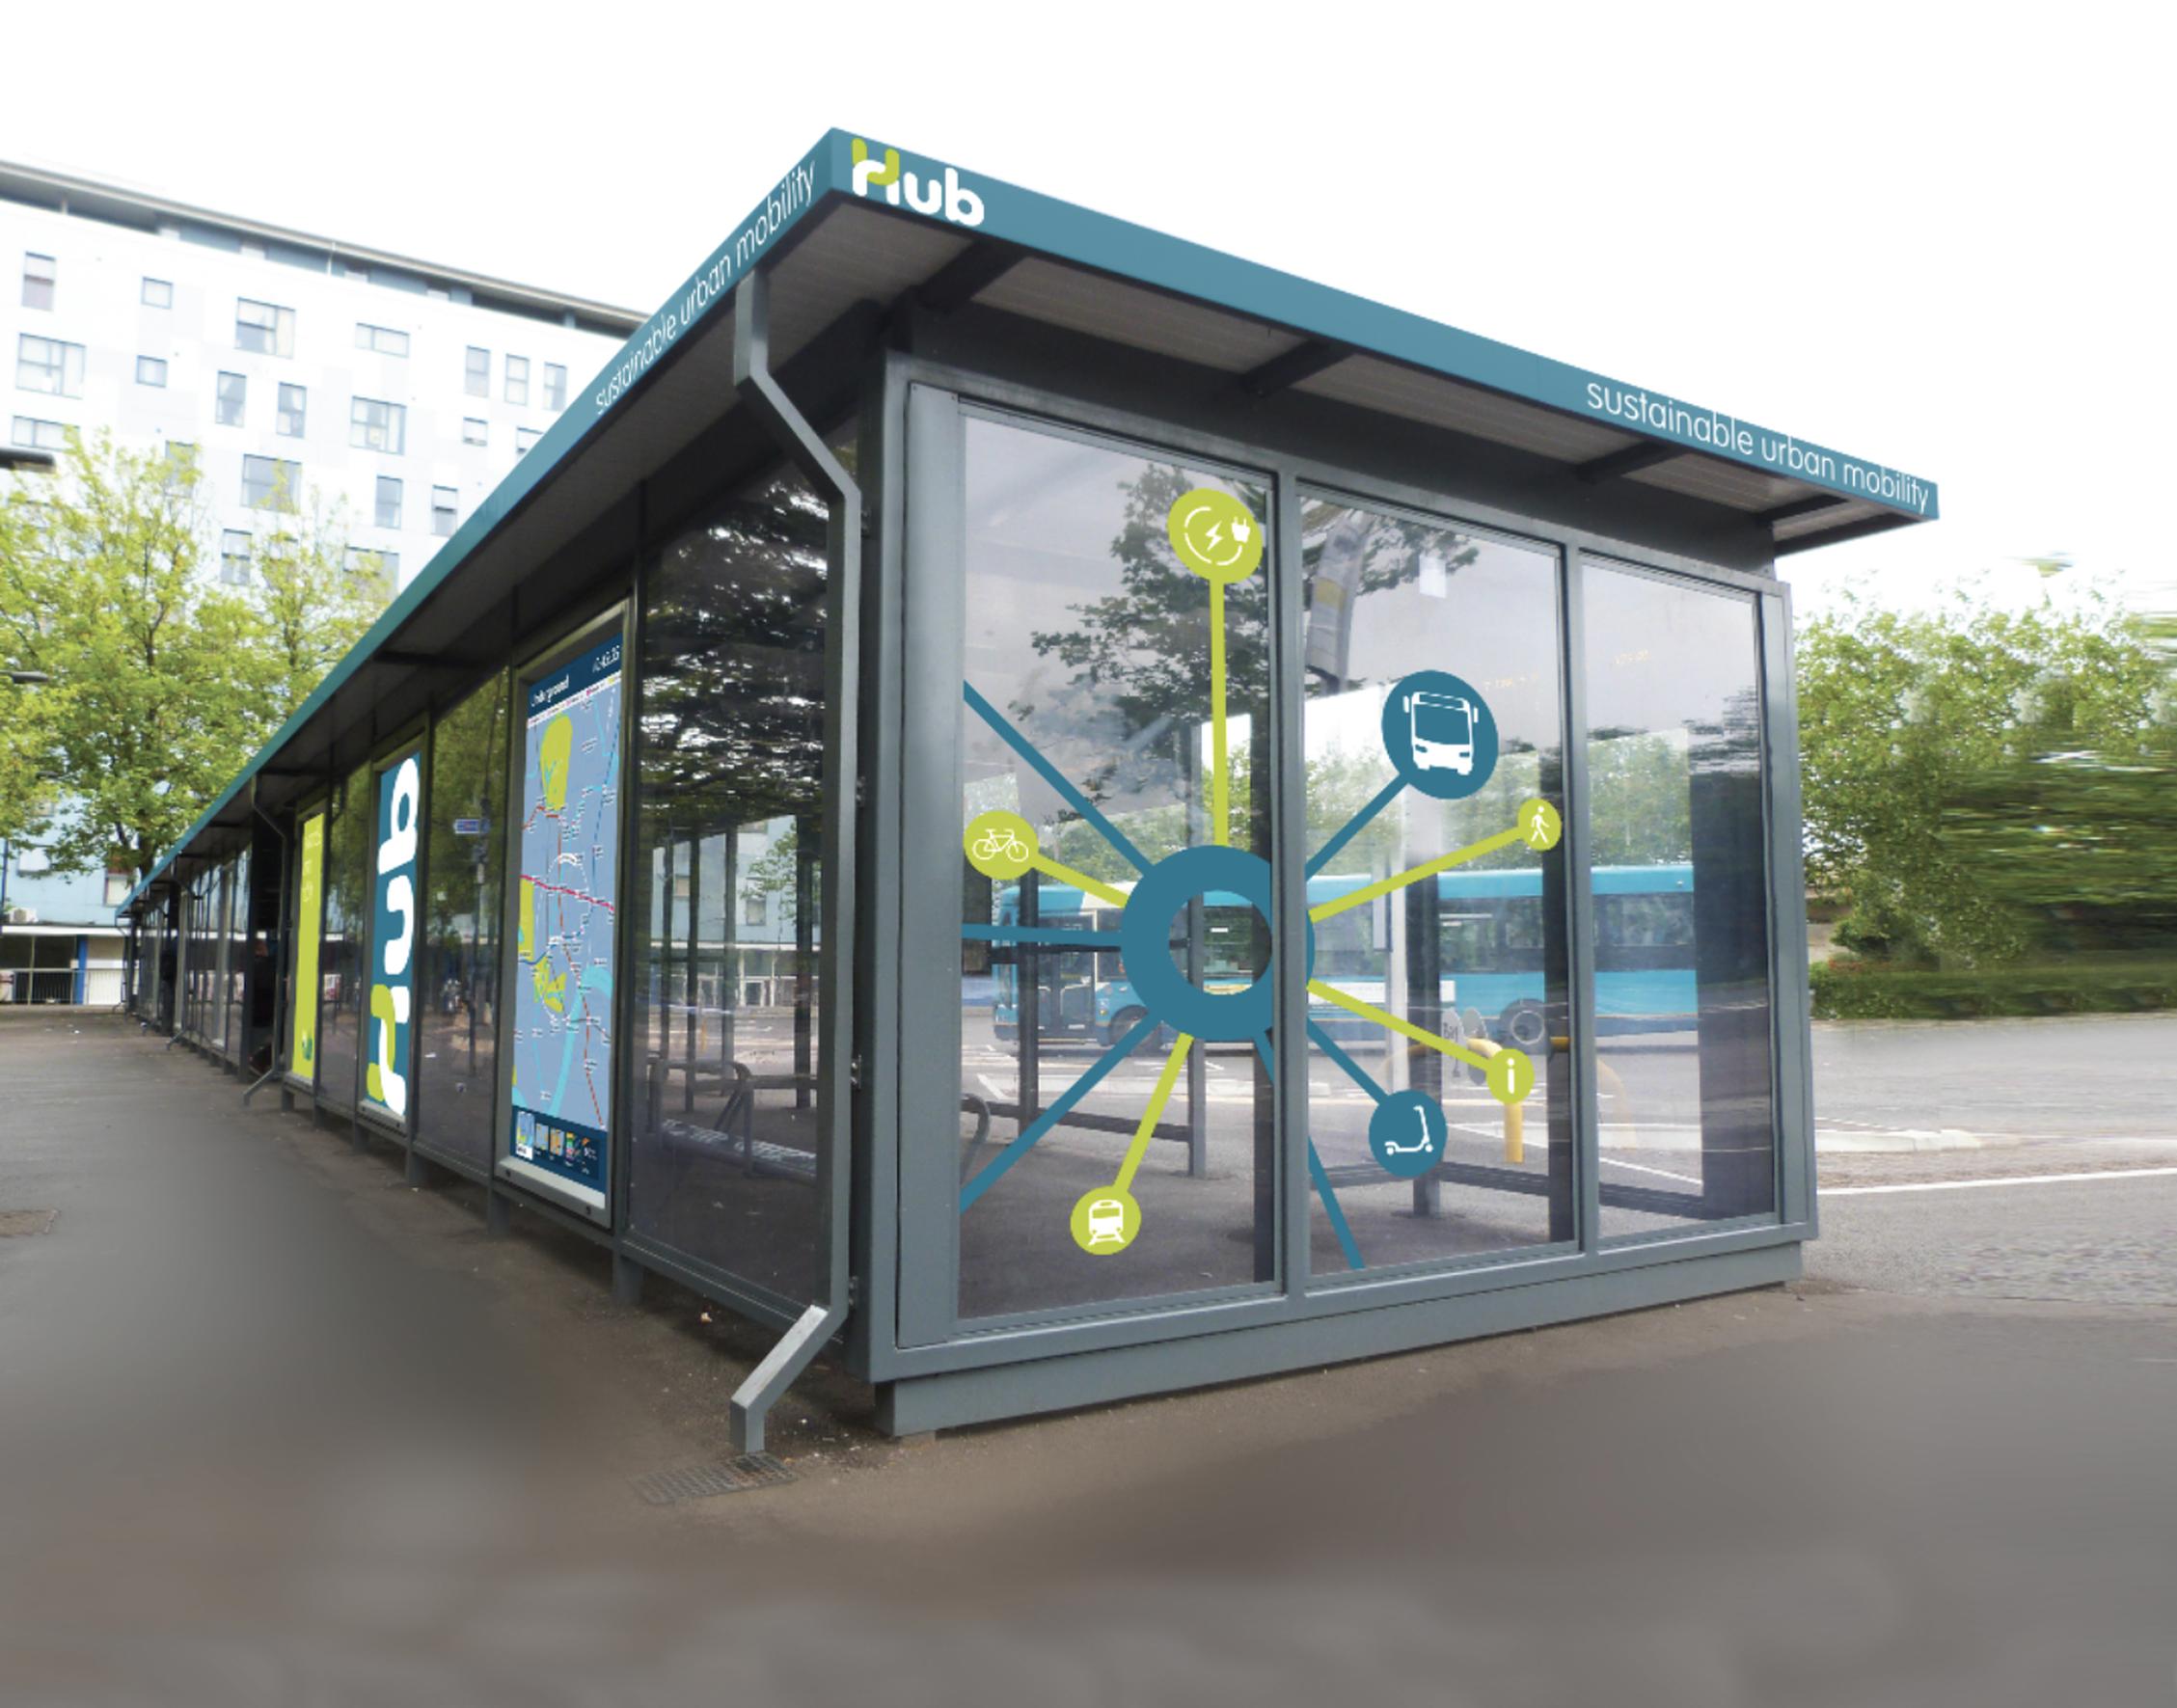 A mobility hub safe public transport passenger covered waiting area designed and provided by Trueform